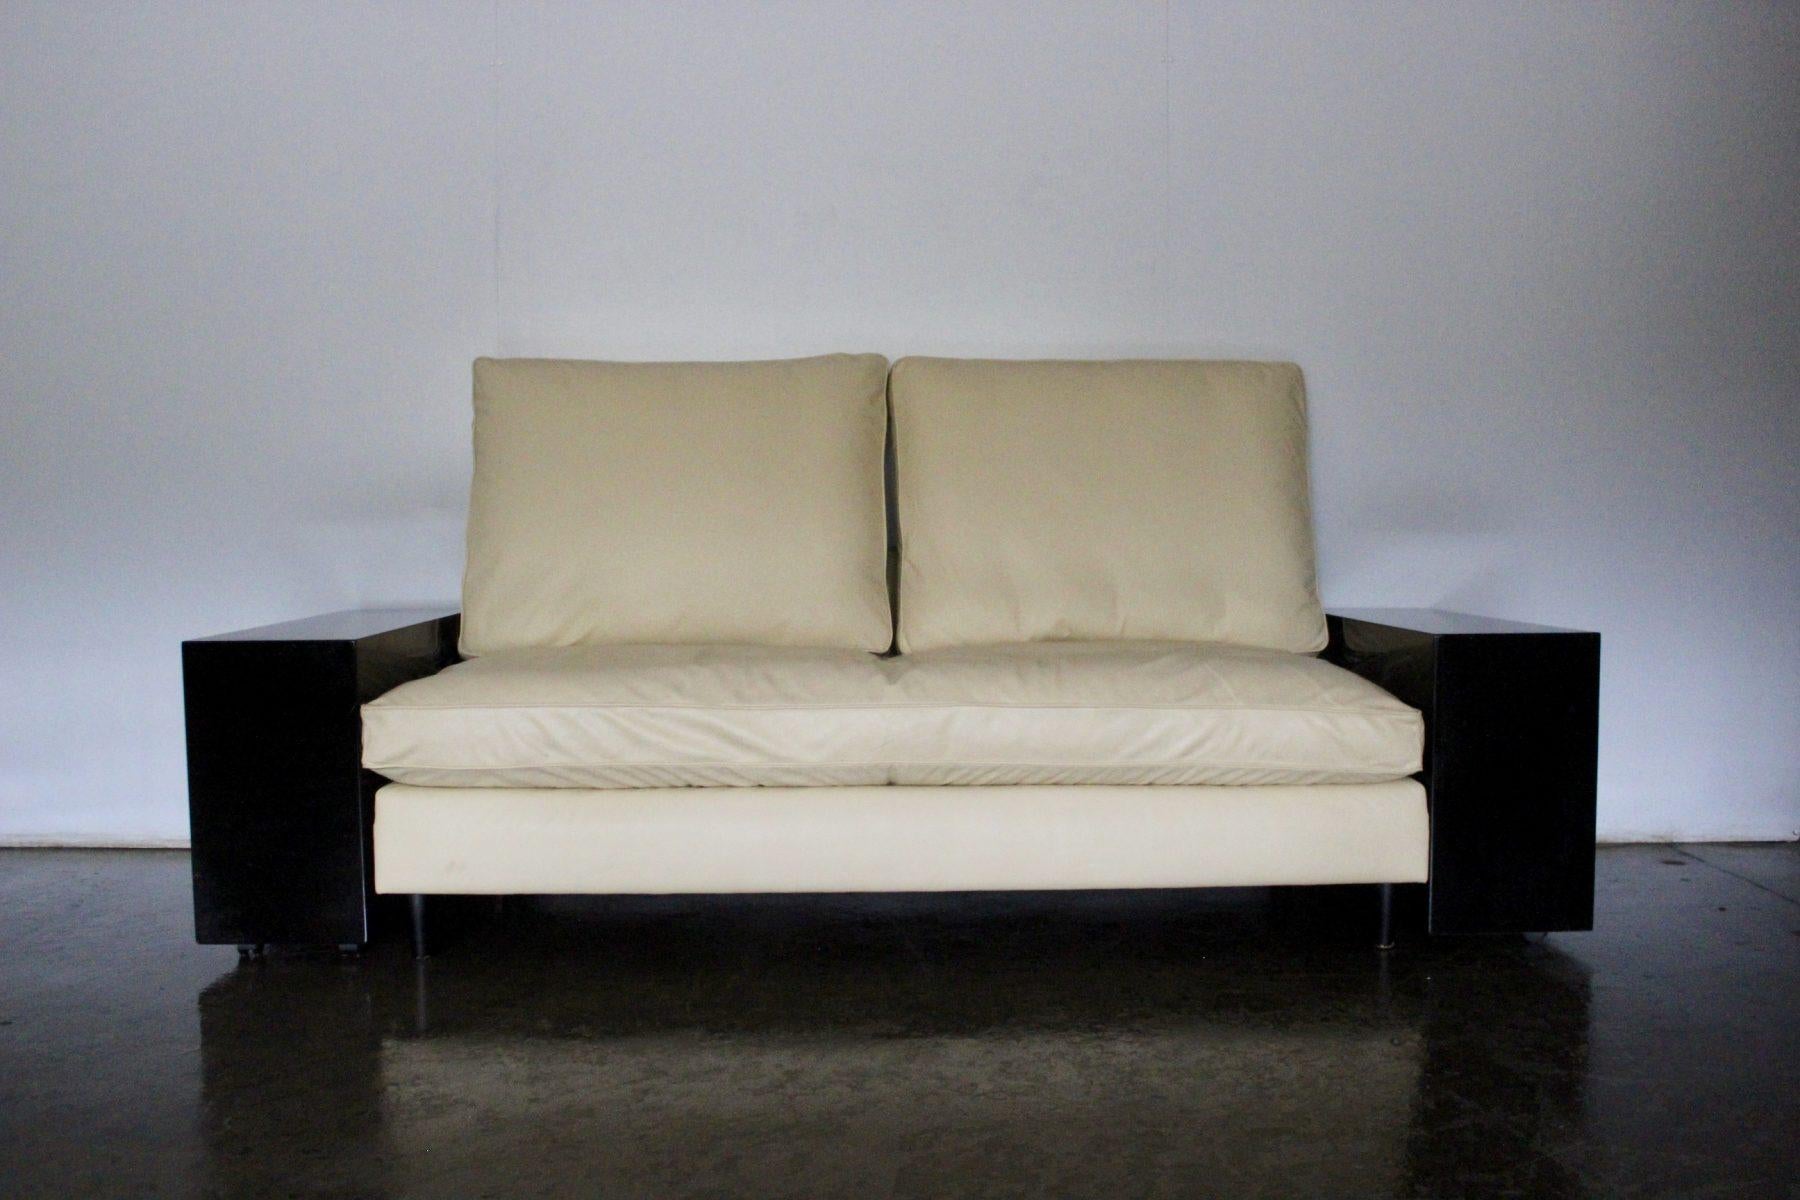 Pair of Aram “Eileen Gray Lota” Sofas in Cream Leather In Good Condition For Sale In Barrowford, GB